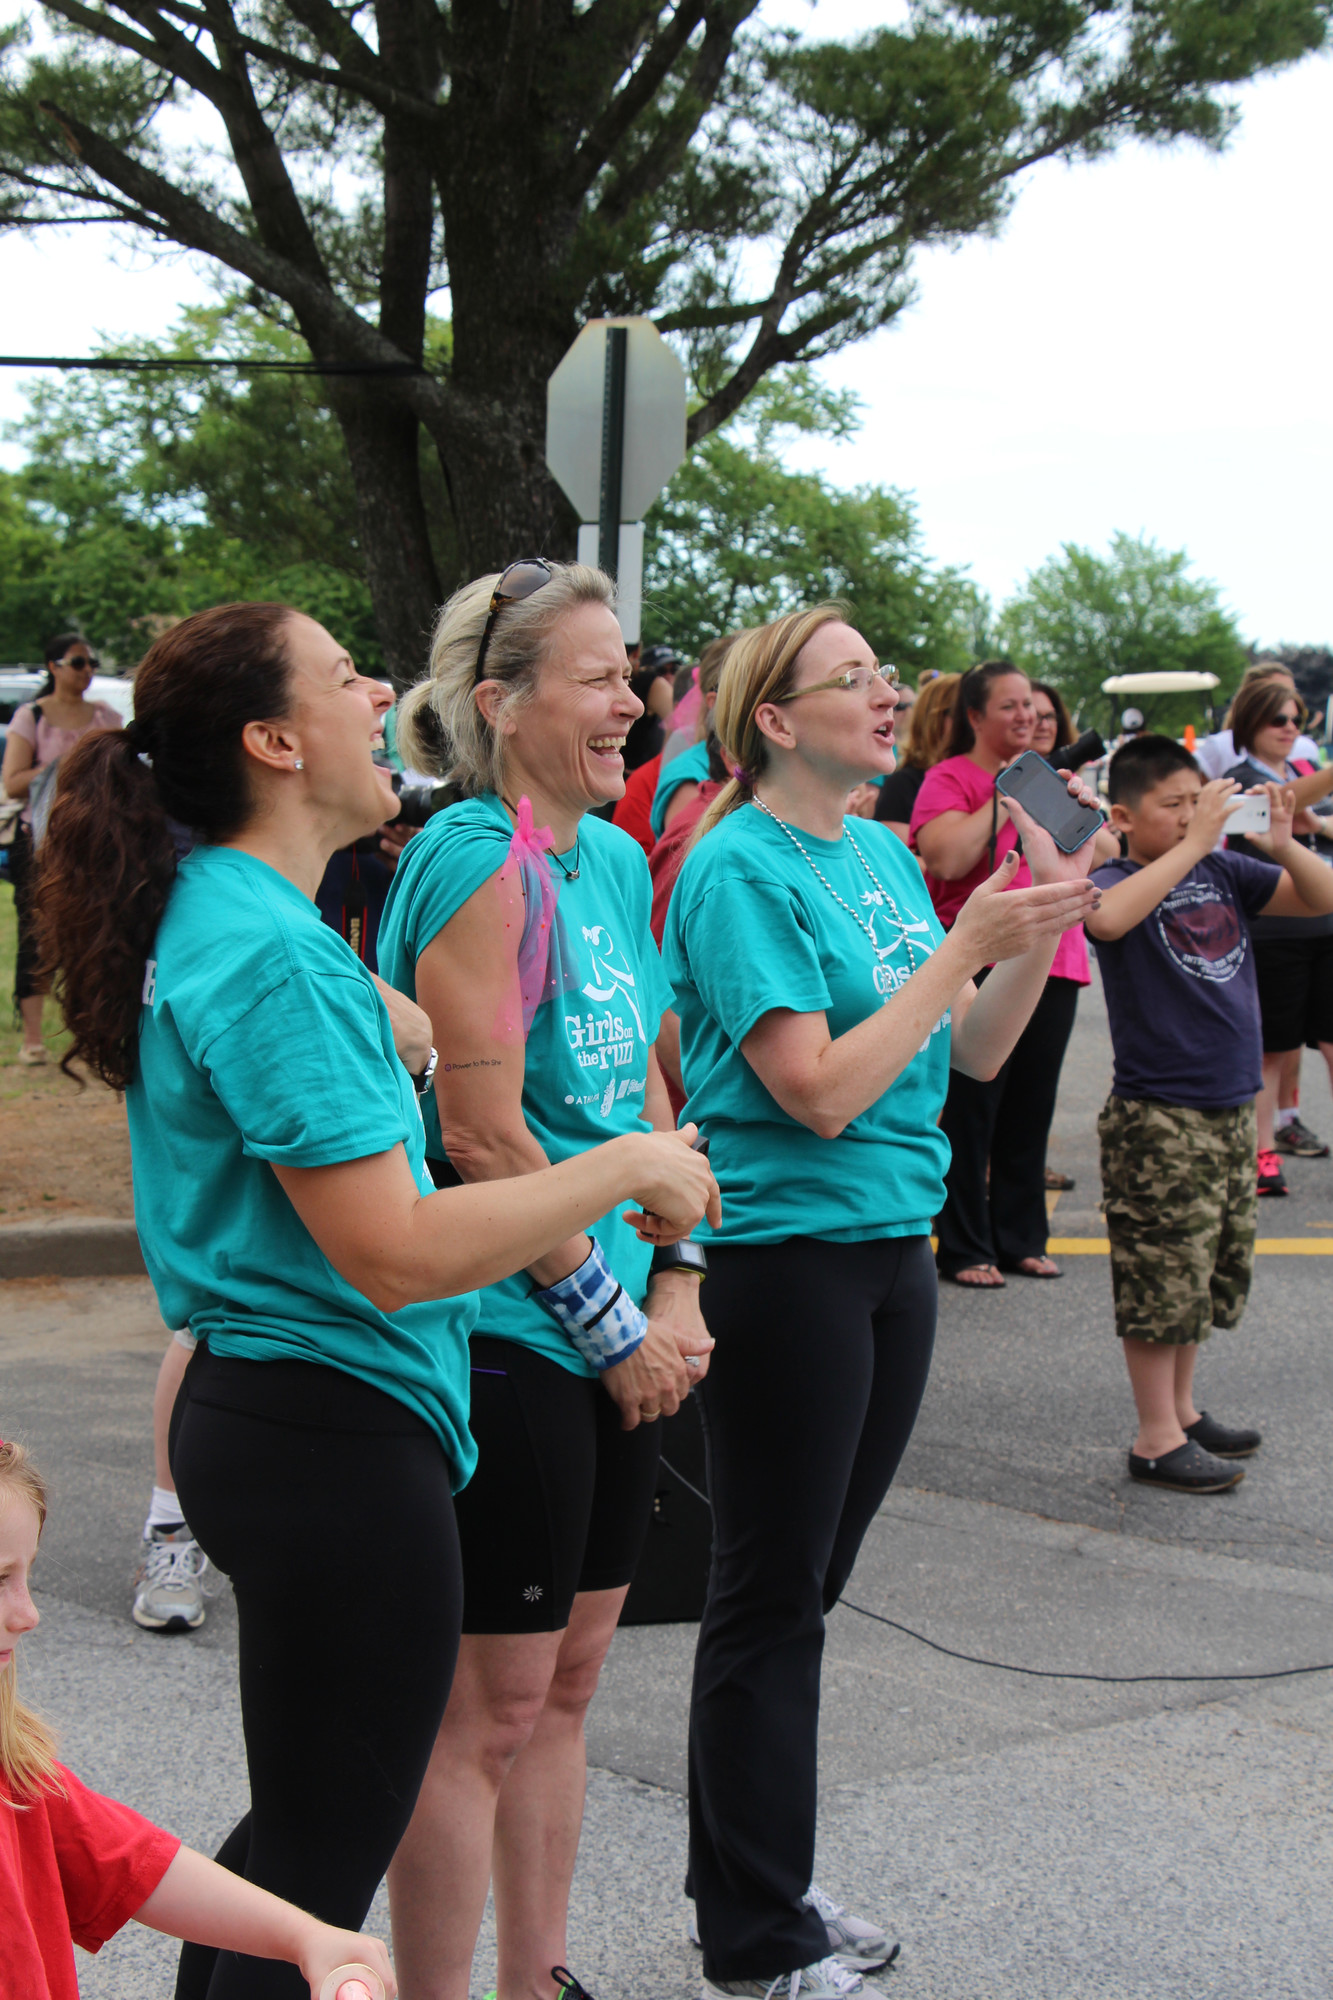 Coaches cheered from the sidelines: KIristina Constantino, Diane Dobler, Kristine Hackett applauded as the girls make their way in to the finish line.